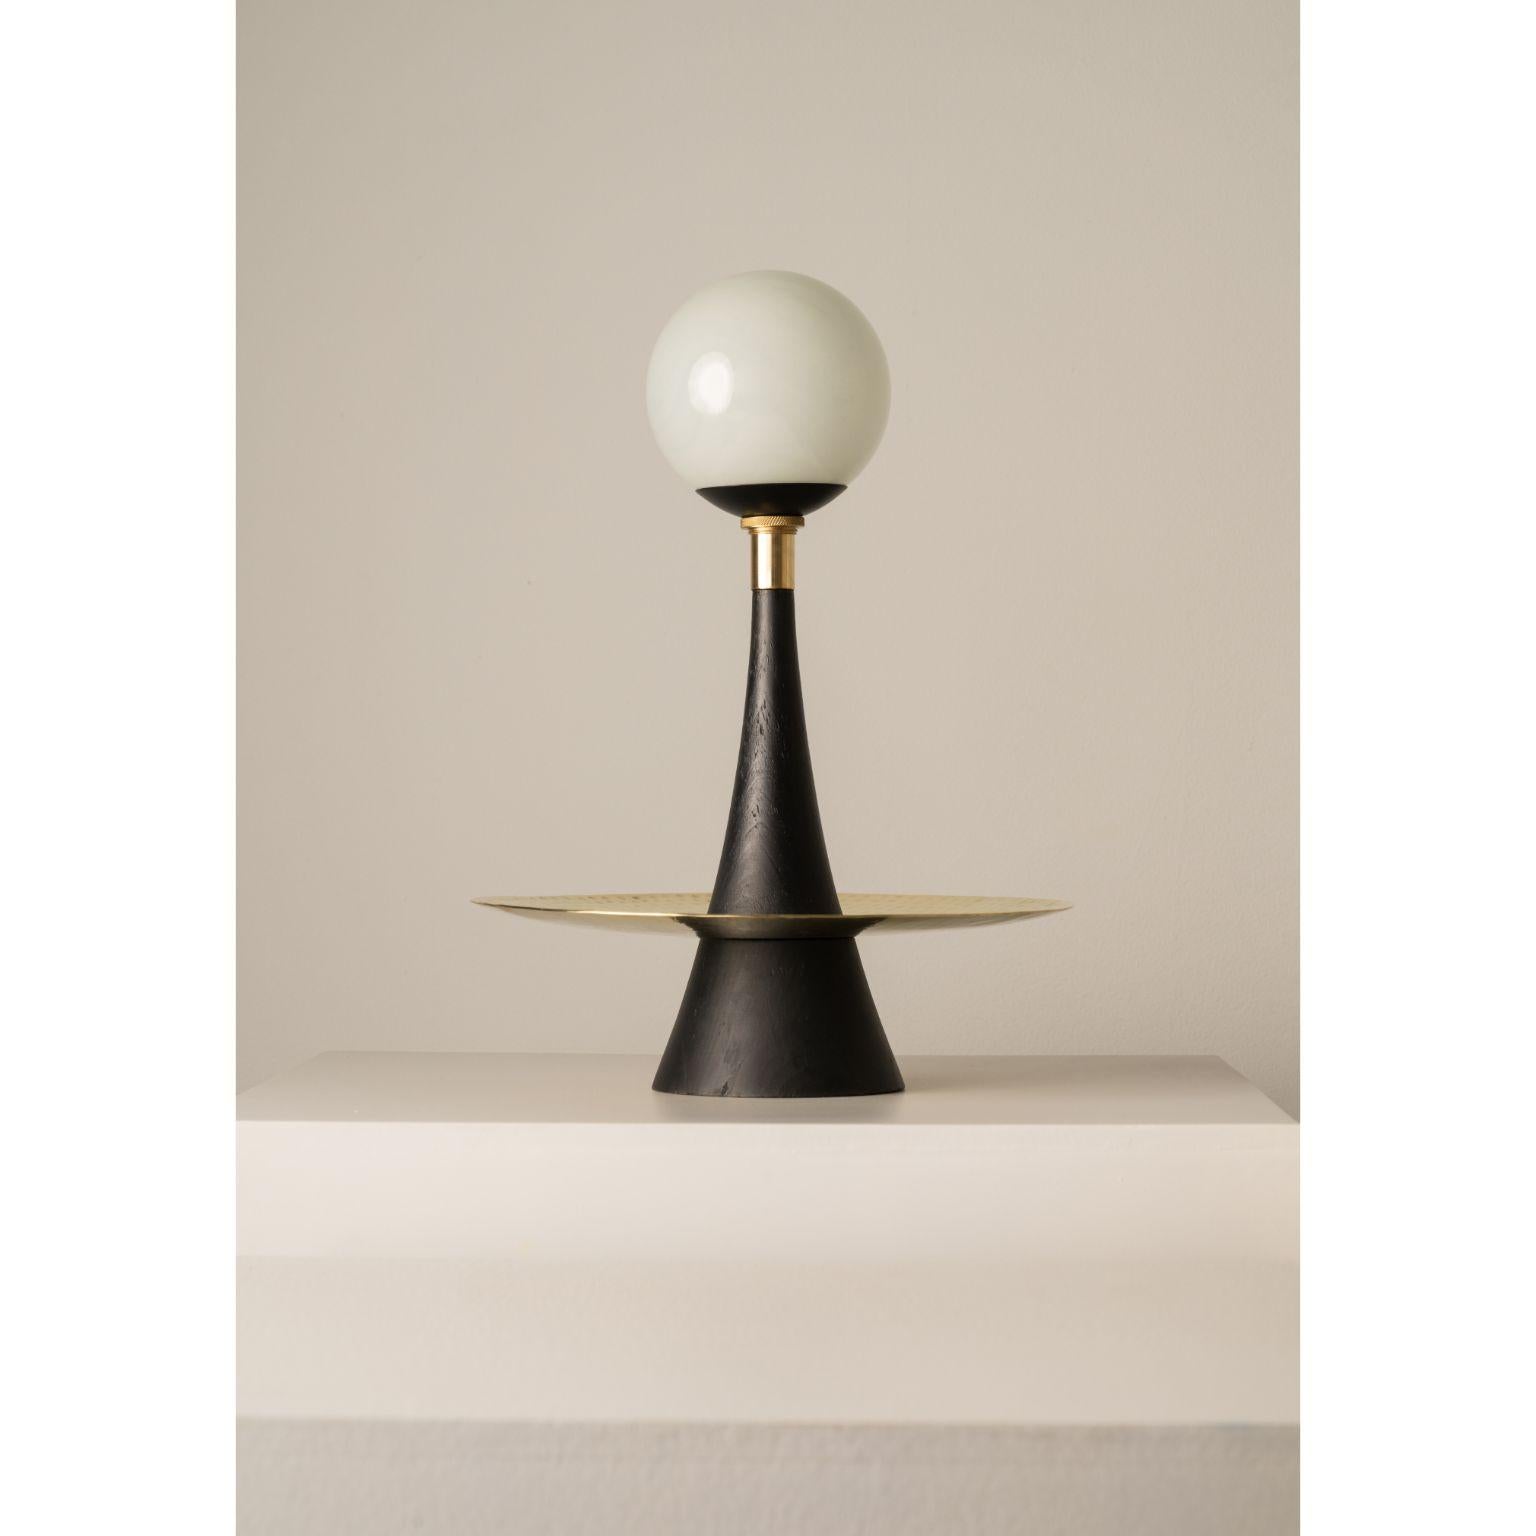 Black Sonic Table Lamp by Isabel Moncada
Dimensions: Ø 30.5 x H 46 cm.
Materials: Turned pine wood in matte black finish, hand-forged brass plate and blown glass globes.

The graceful shape of this lamp takes inspiration from the futuristic-looking